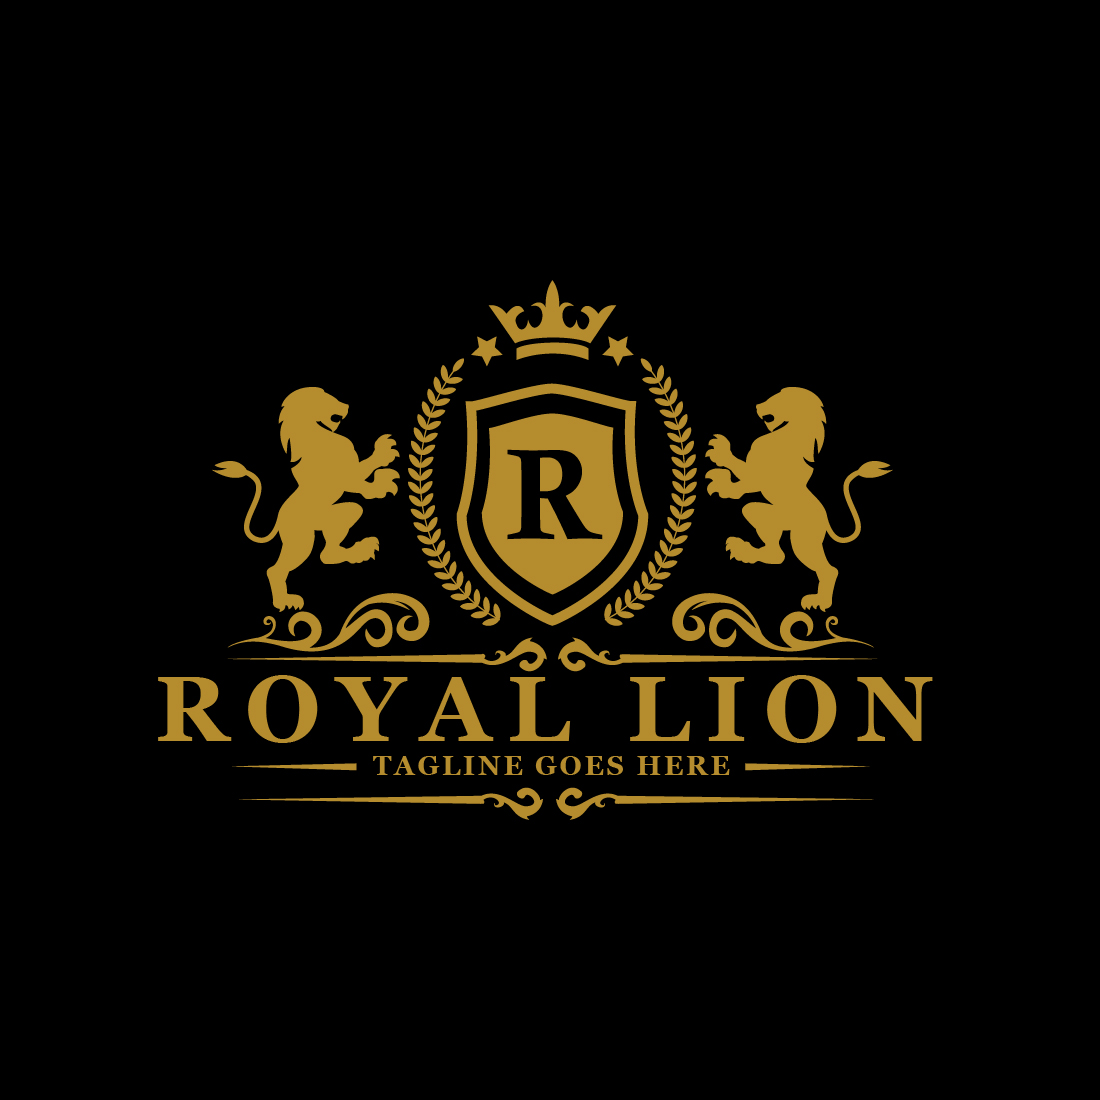 Royal Lion Heraldic Logos only - $ 15 preview image.